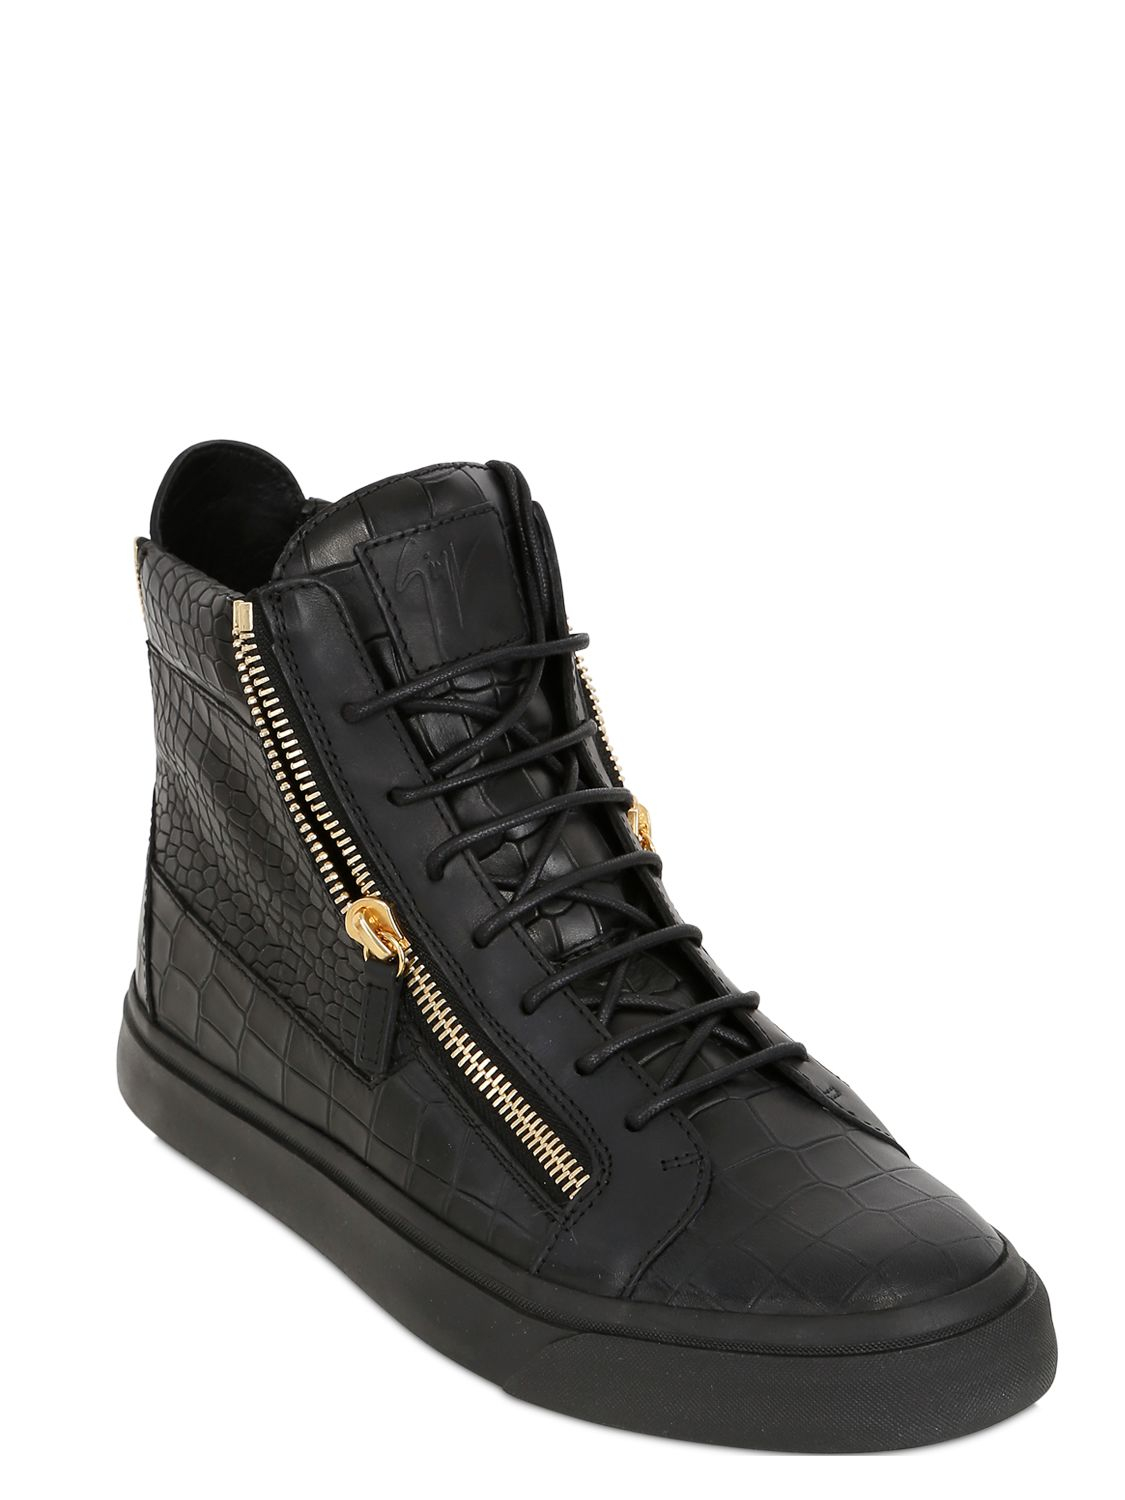 Giuseppe Zanotti Homme Croc Embossed Leather High Top Sneakers in Black ...